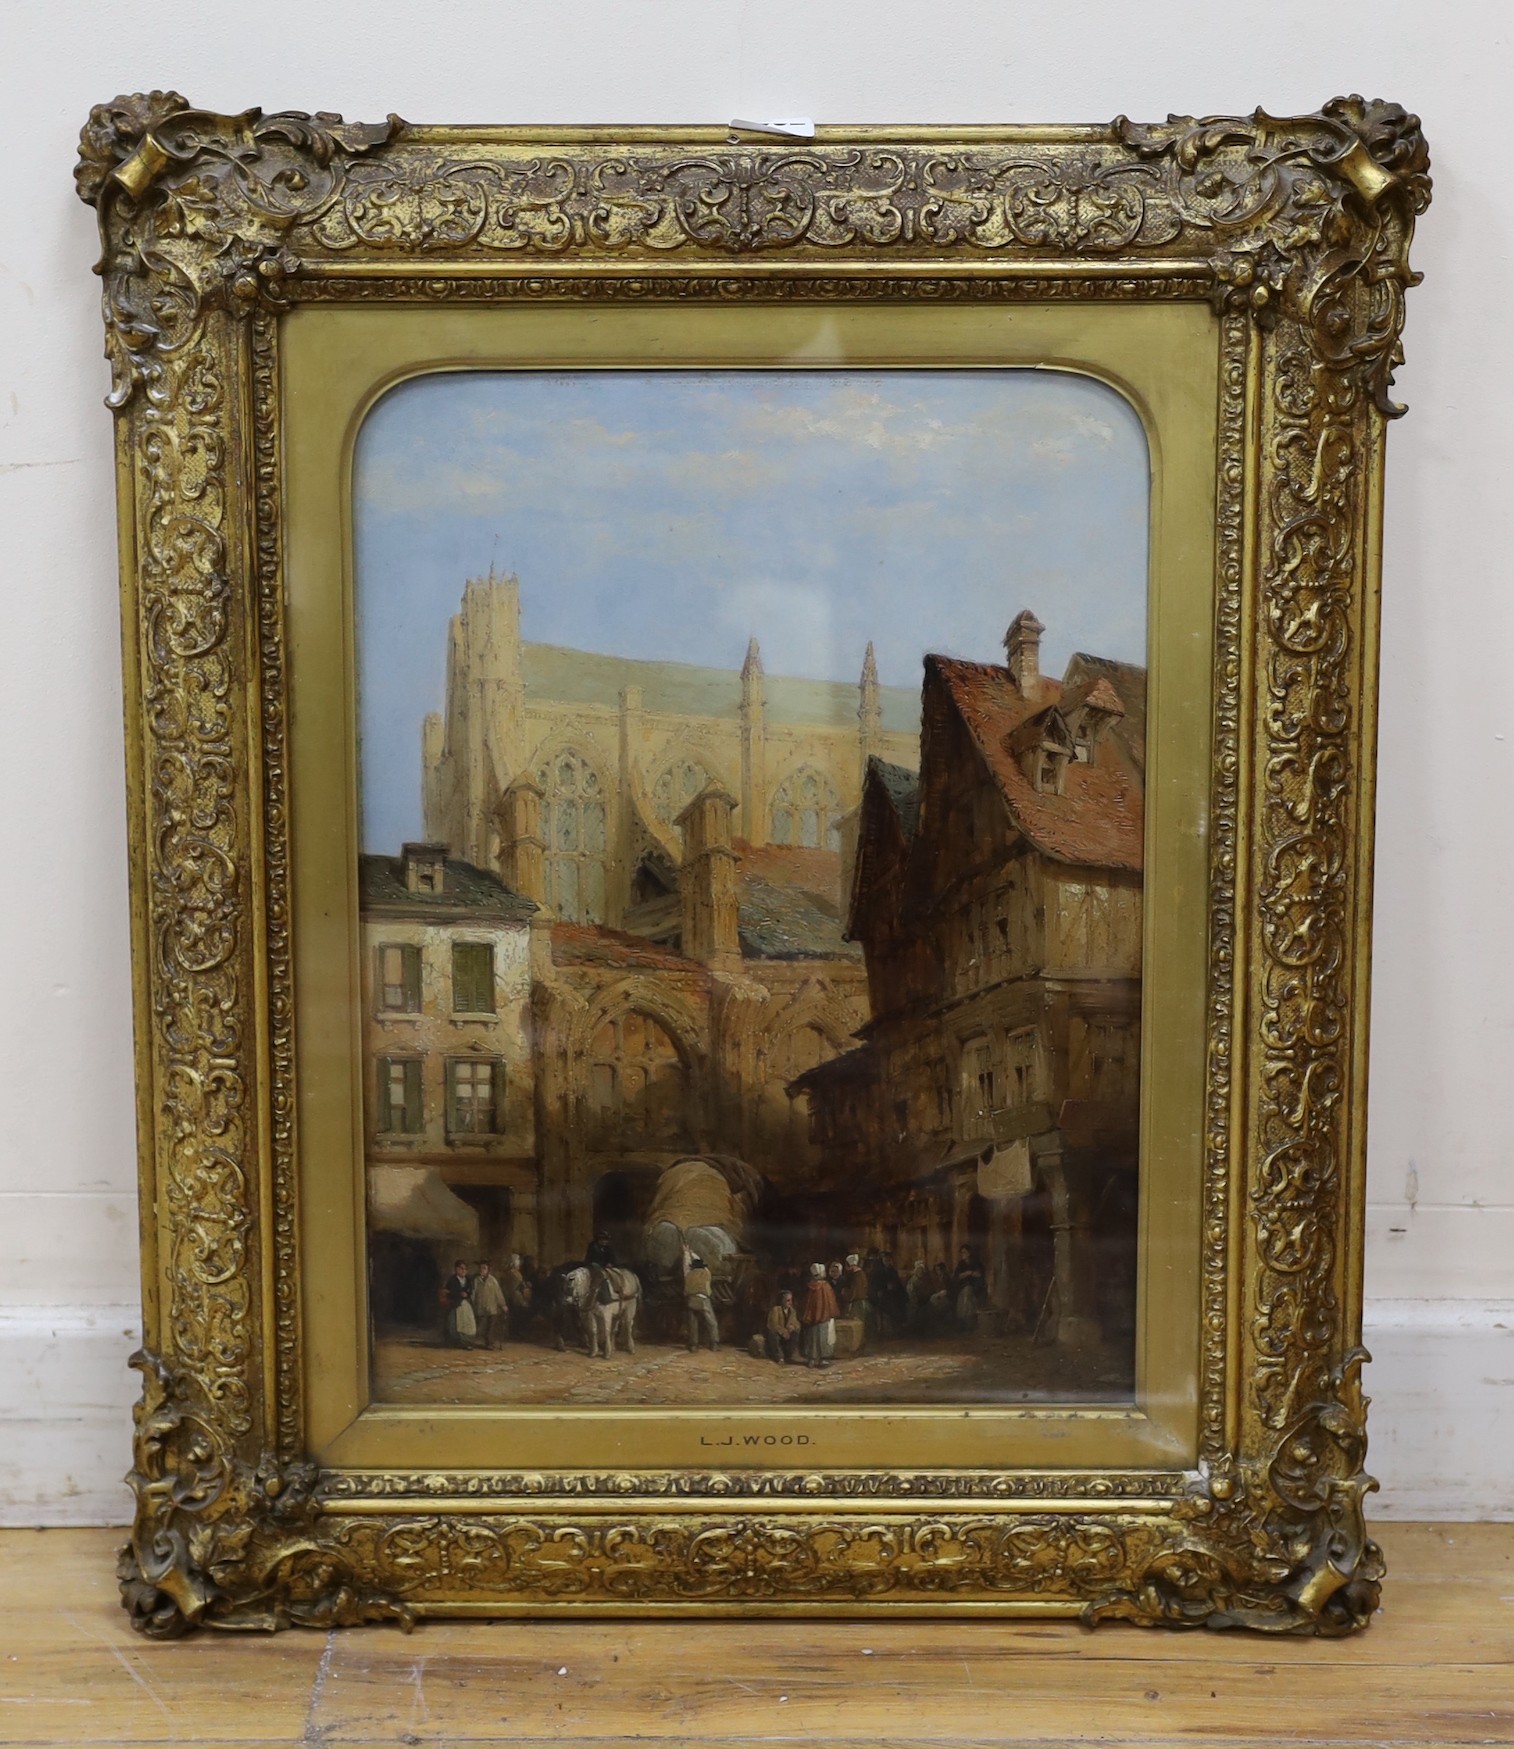 Lewis John Wood RI (1813-1901), oil on board, 'Church of St Nicolas, Rouen', signed verso and dated 1852, 40 x 30cm.